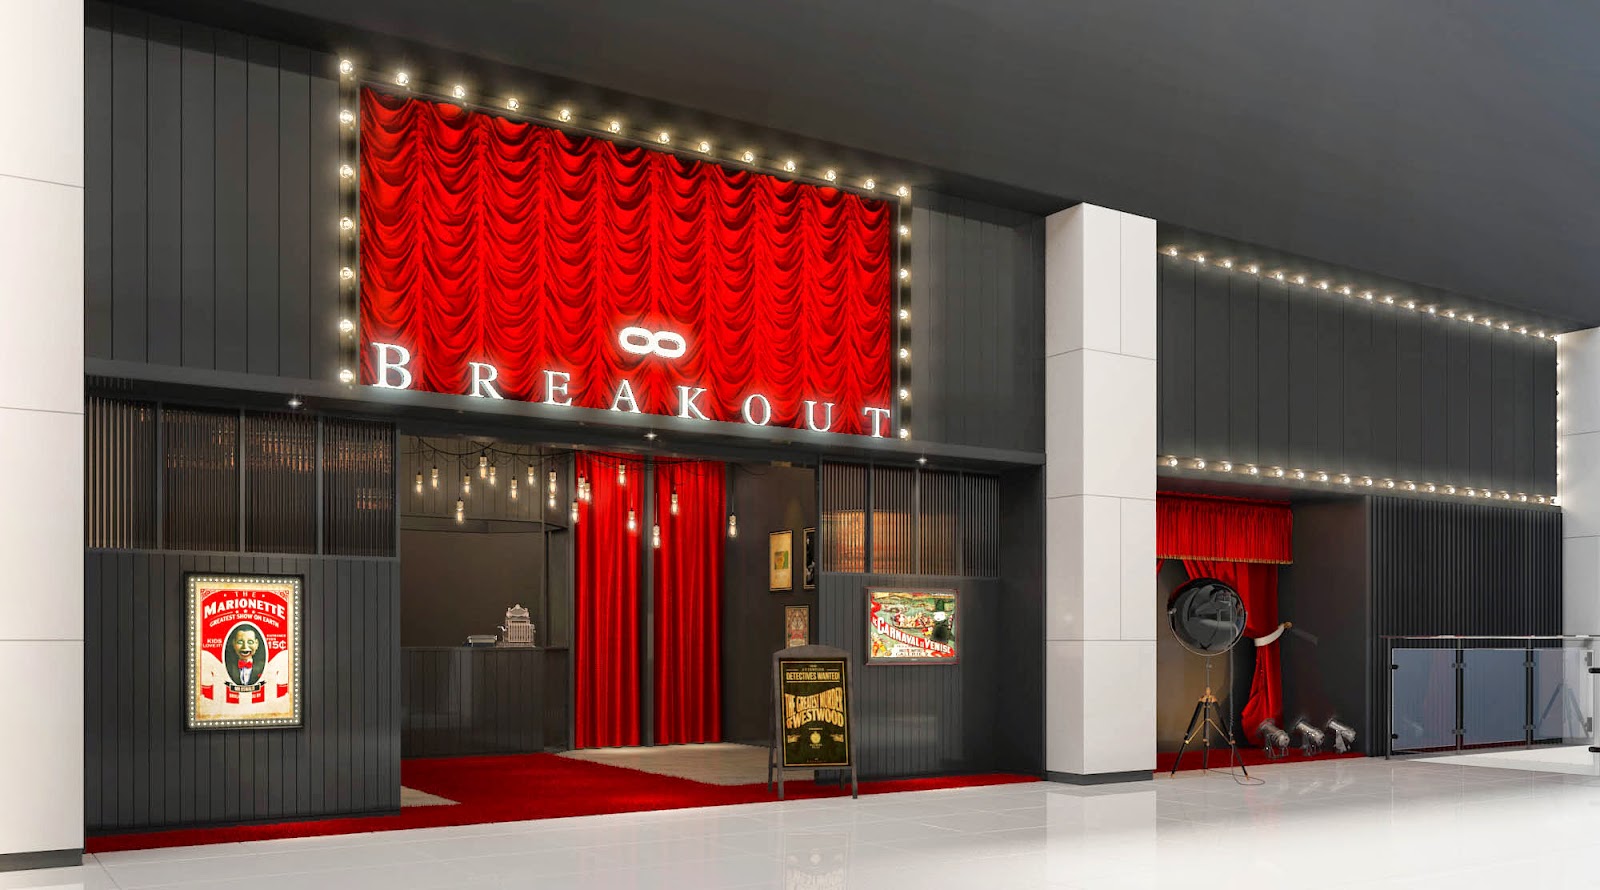 [Official Release] BREAKOUT will open new outlet with 7 brand new themed rooms in NuSentral in May 2015!